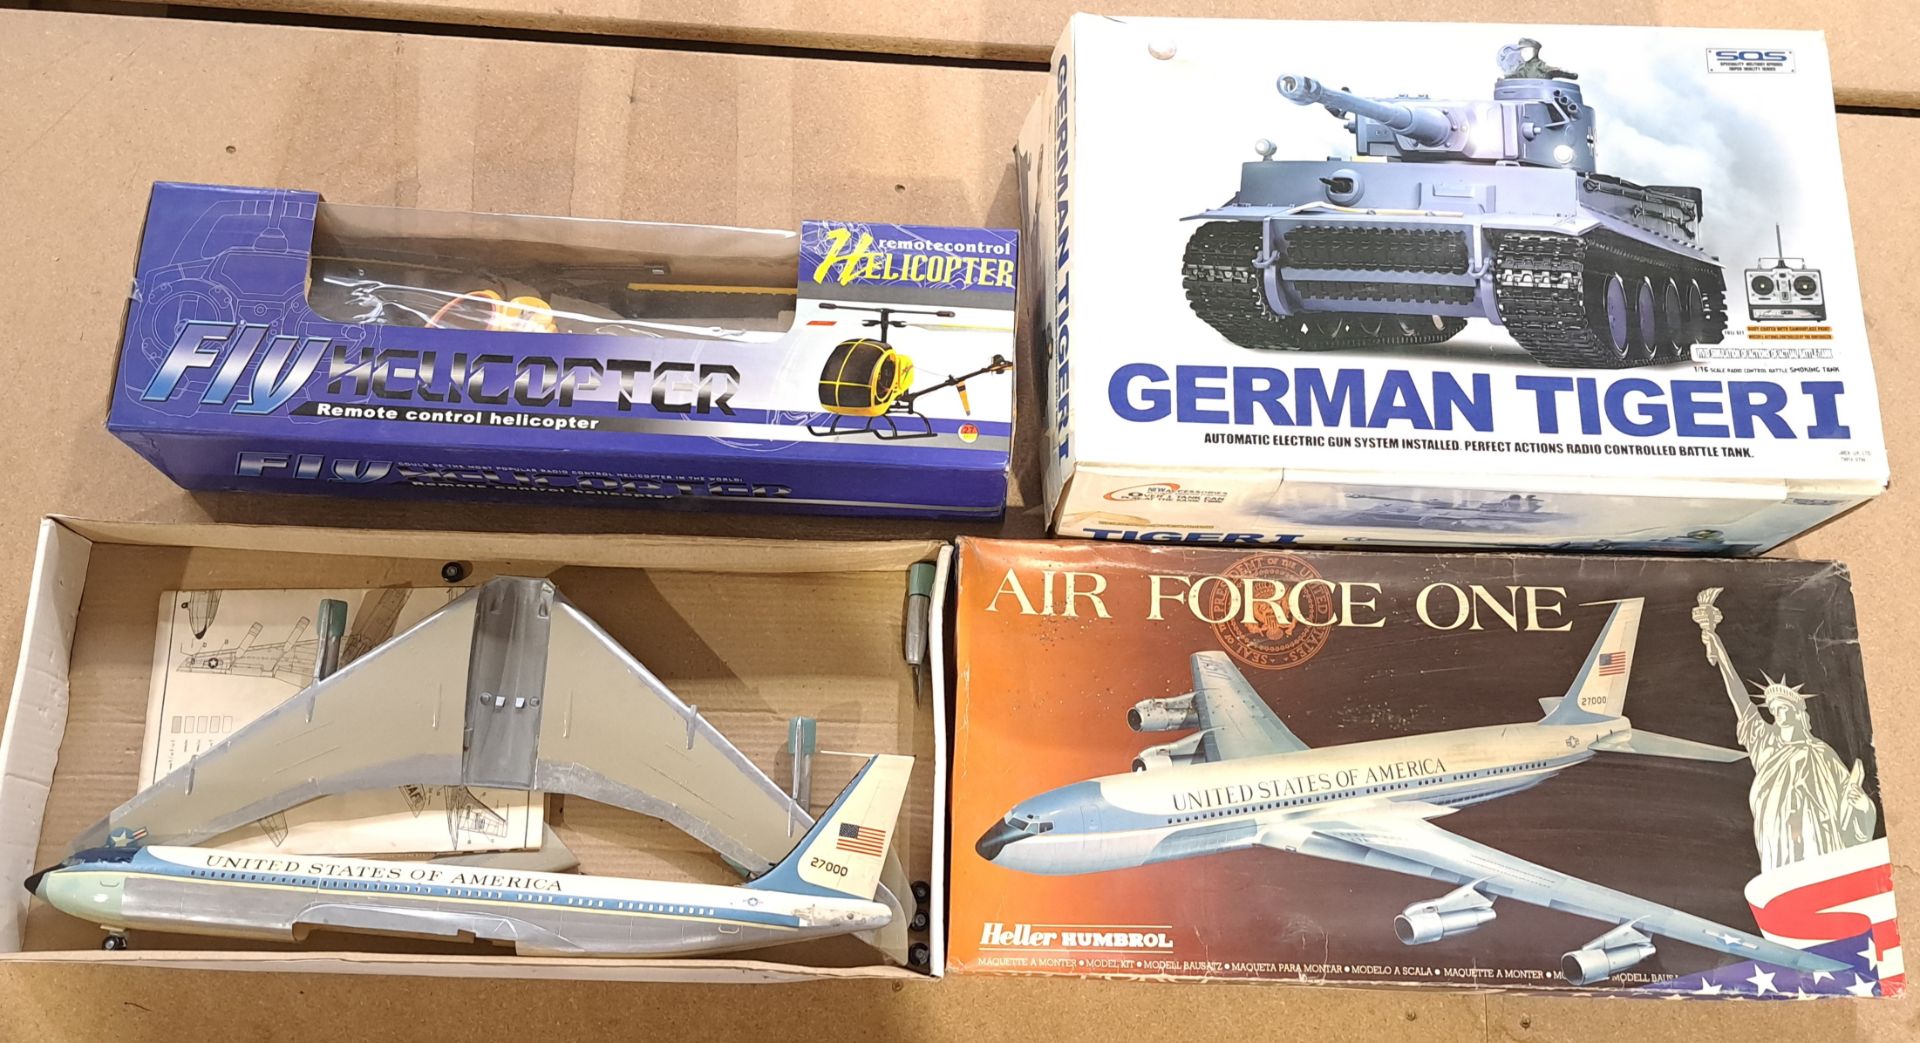 A Radio Controlled pair plus Heller Humbrol Air Force One pre-made plastic model kit